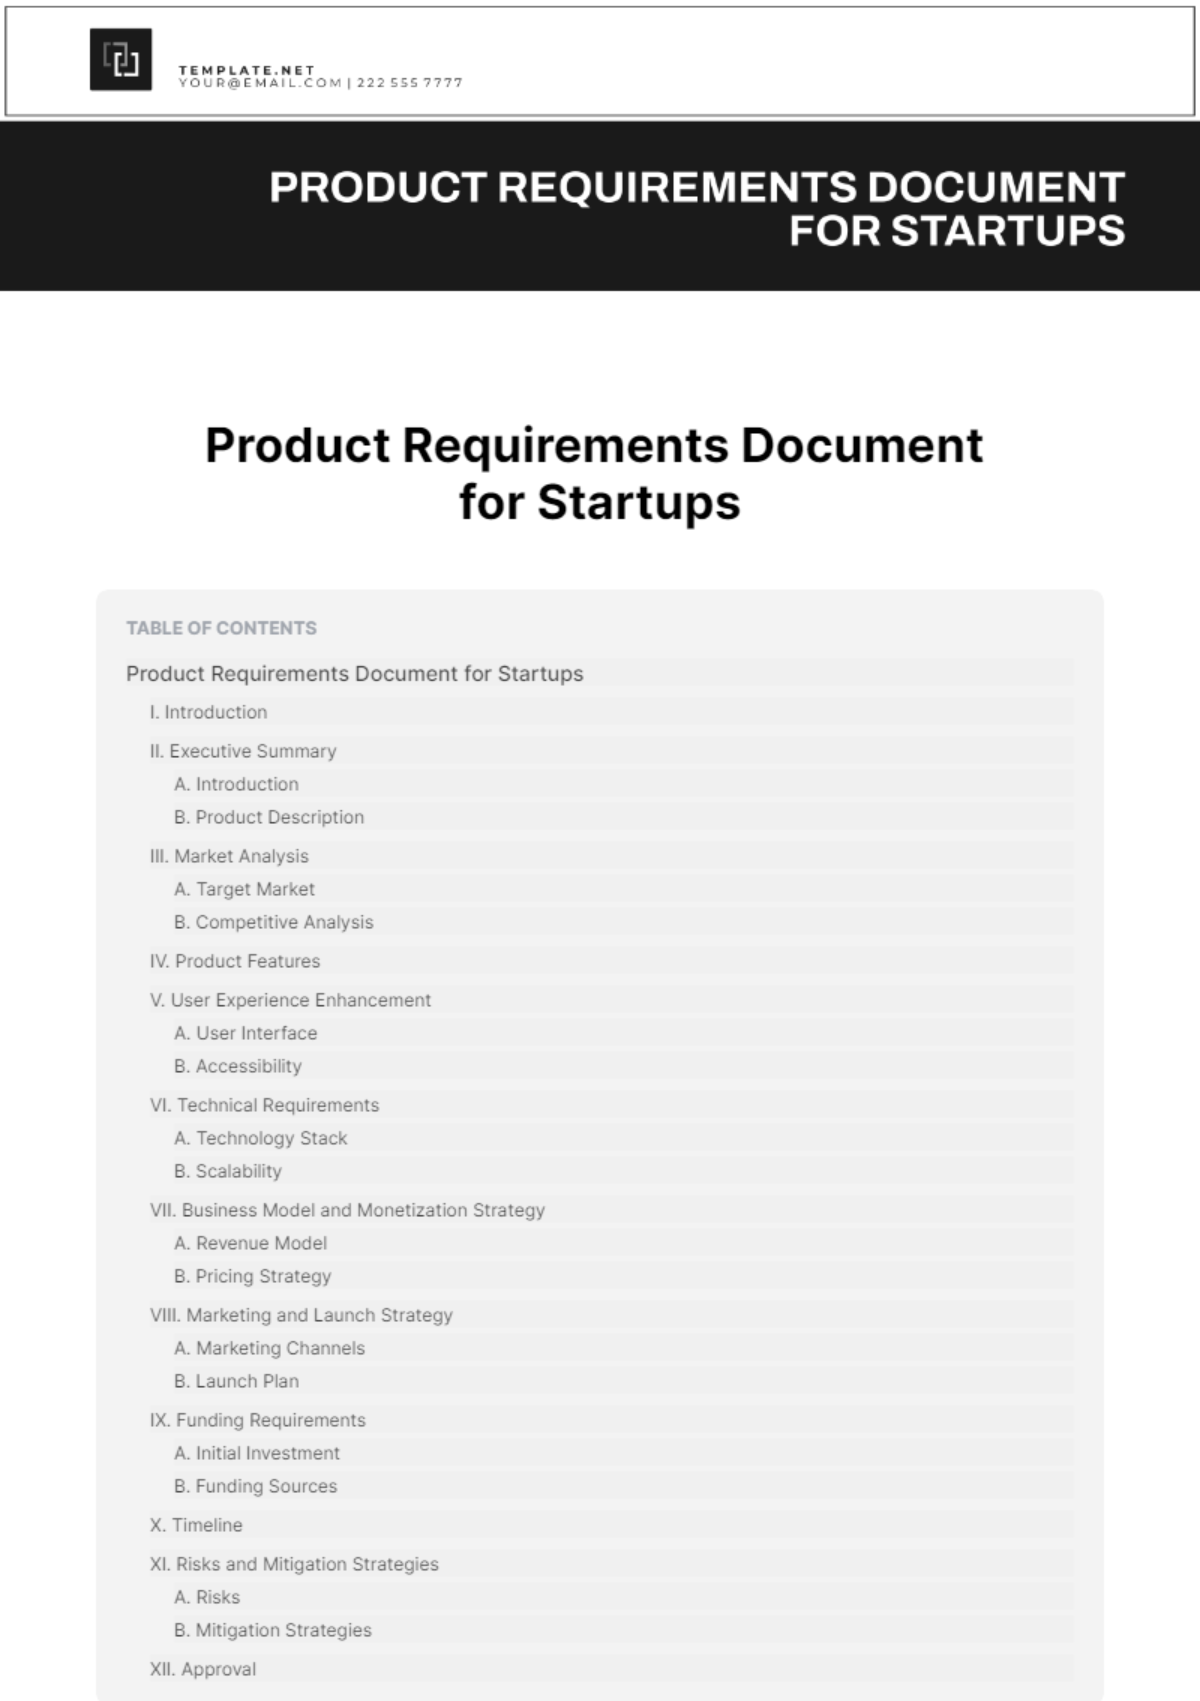 Product Requirements Document for Startups Template